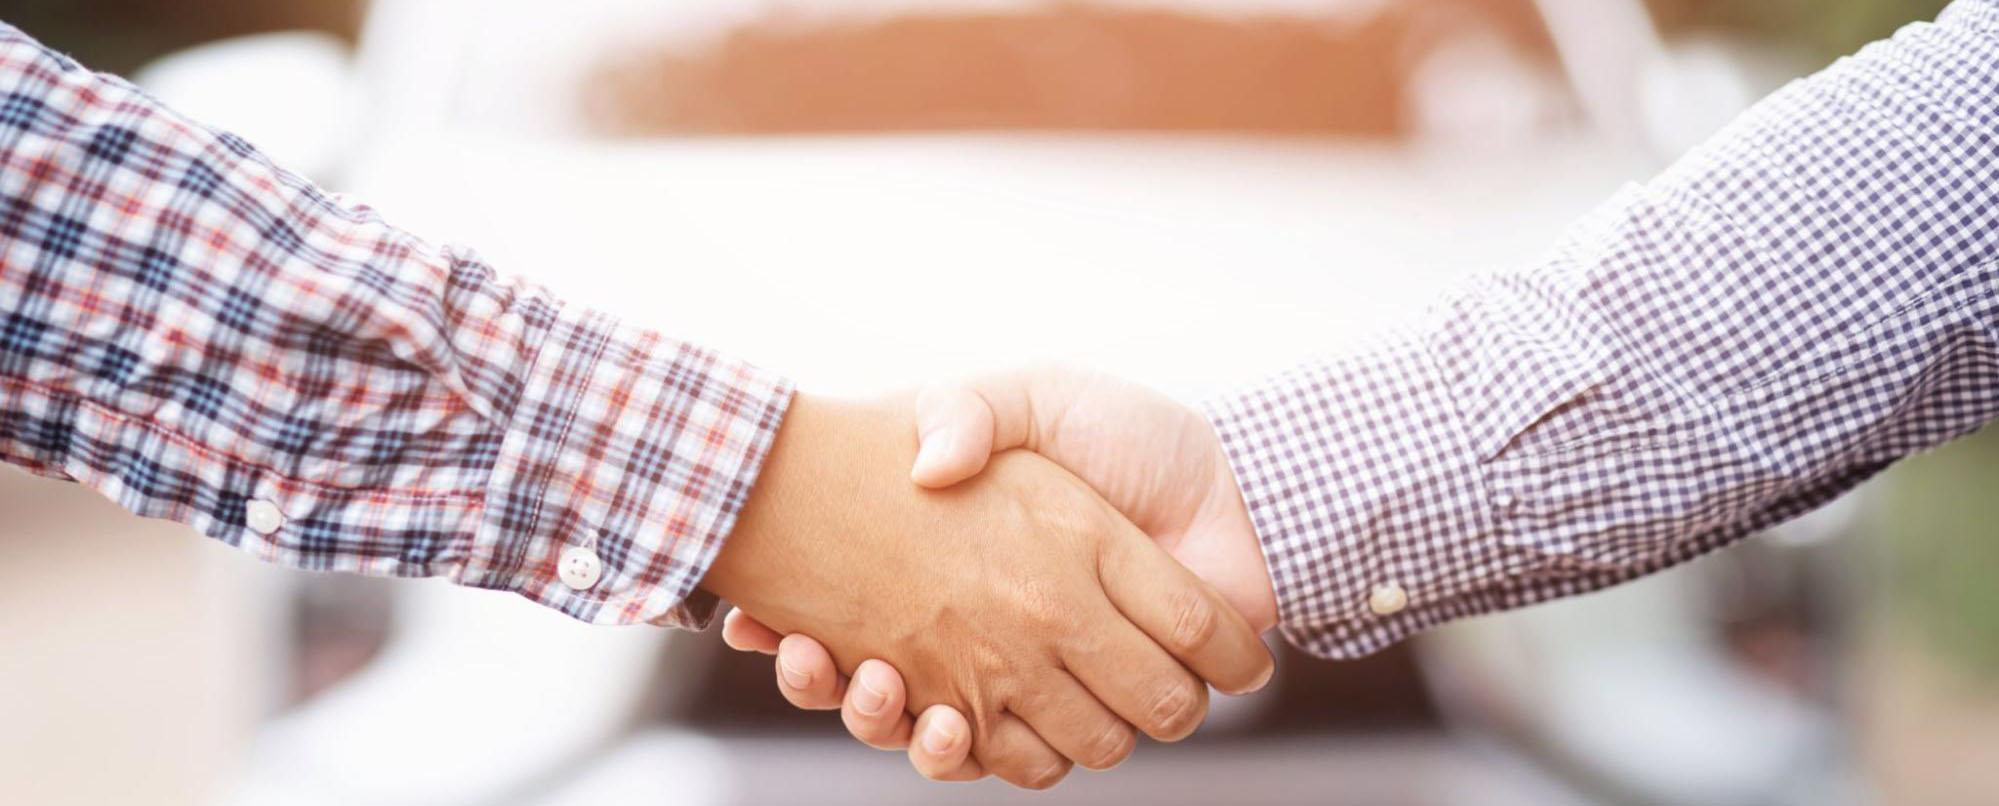 Car dealer shaking hands with client